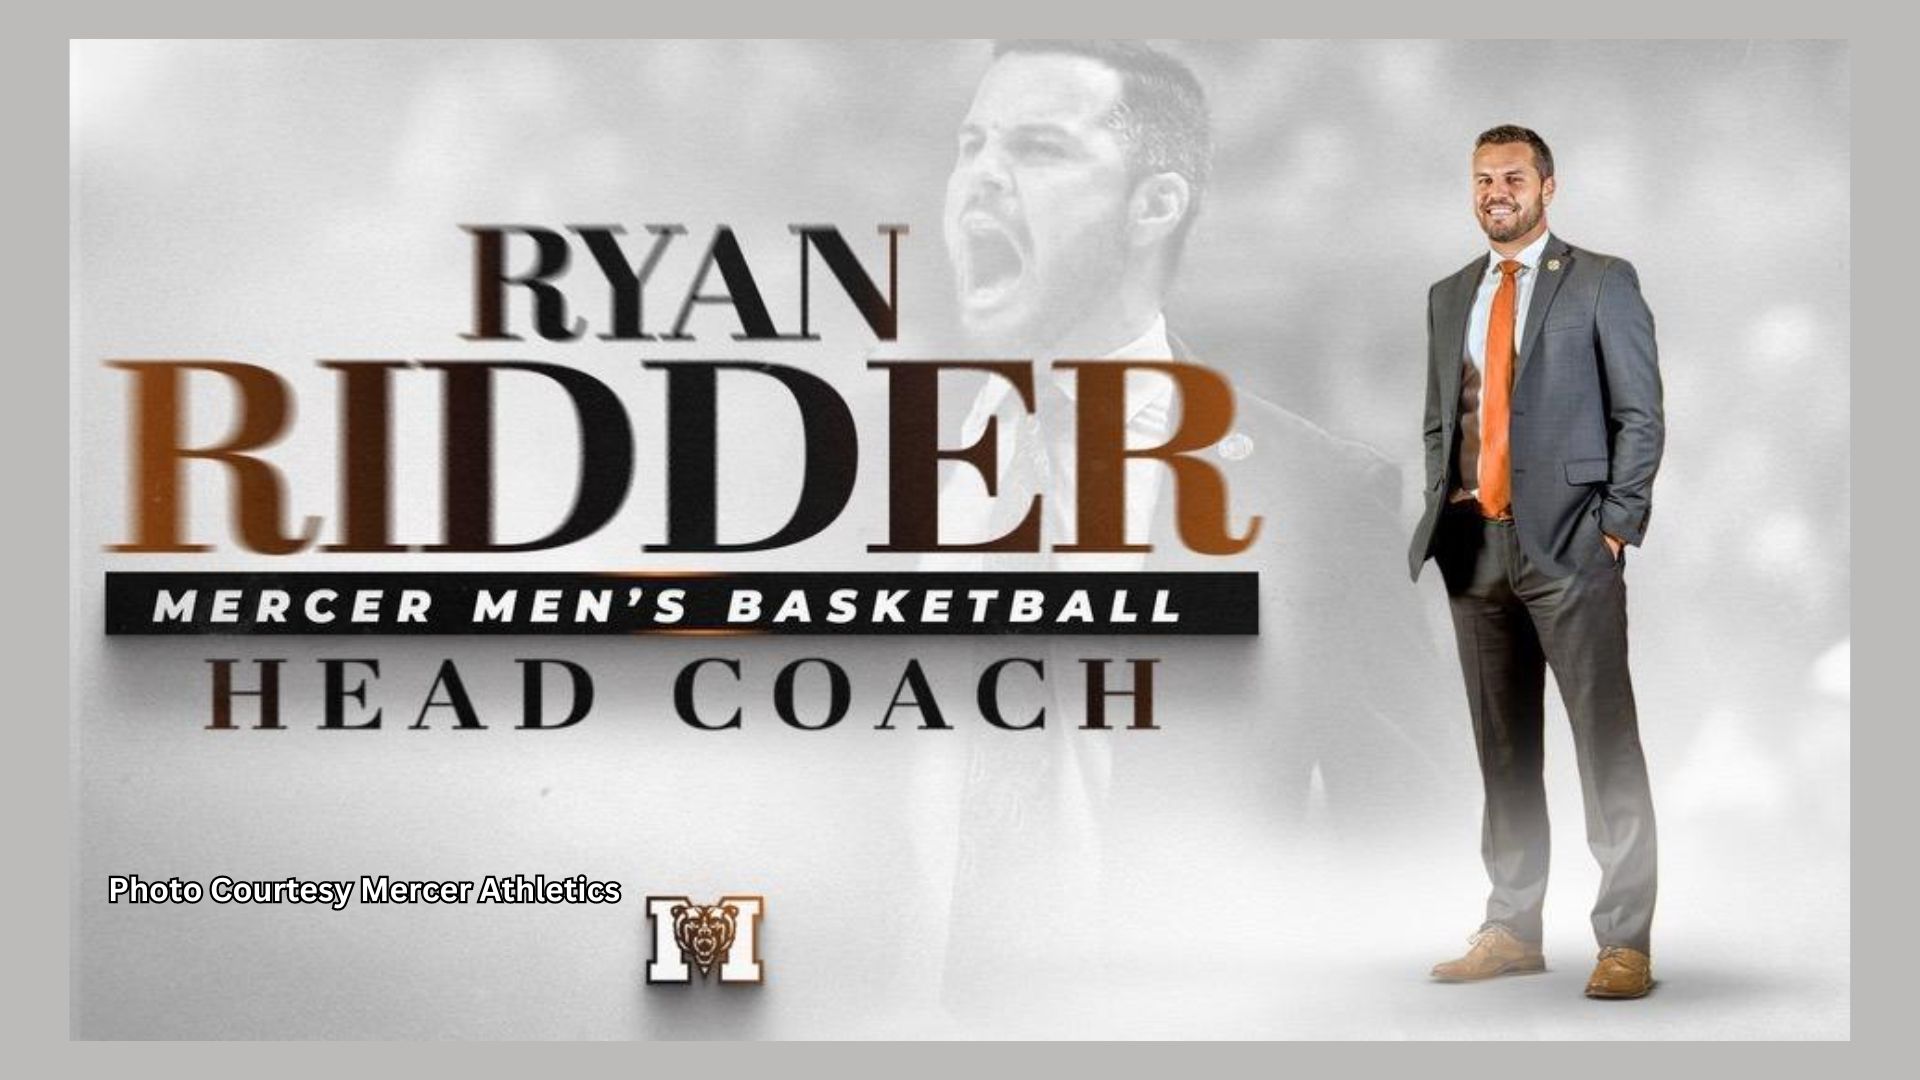 New Head Coach Ryan Ridder Energizes Mercer Basketball Program with Track Record of Success